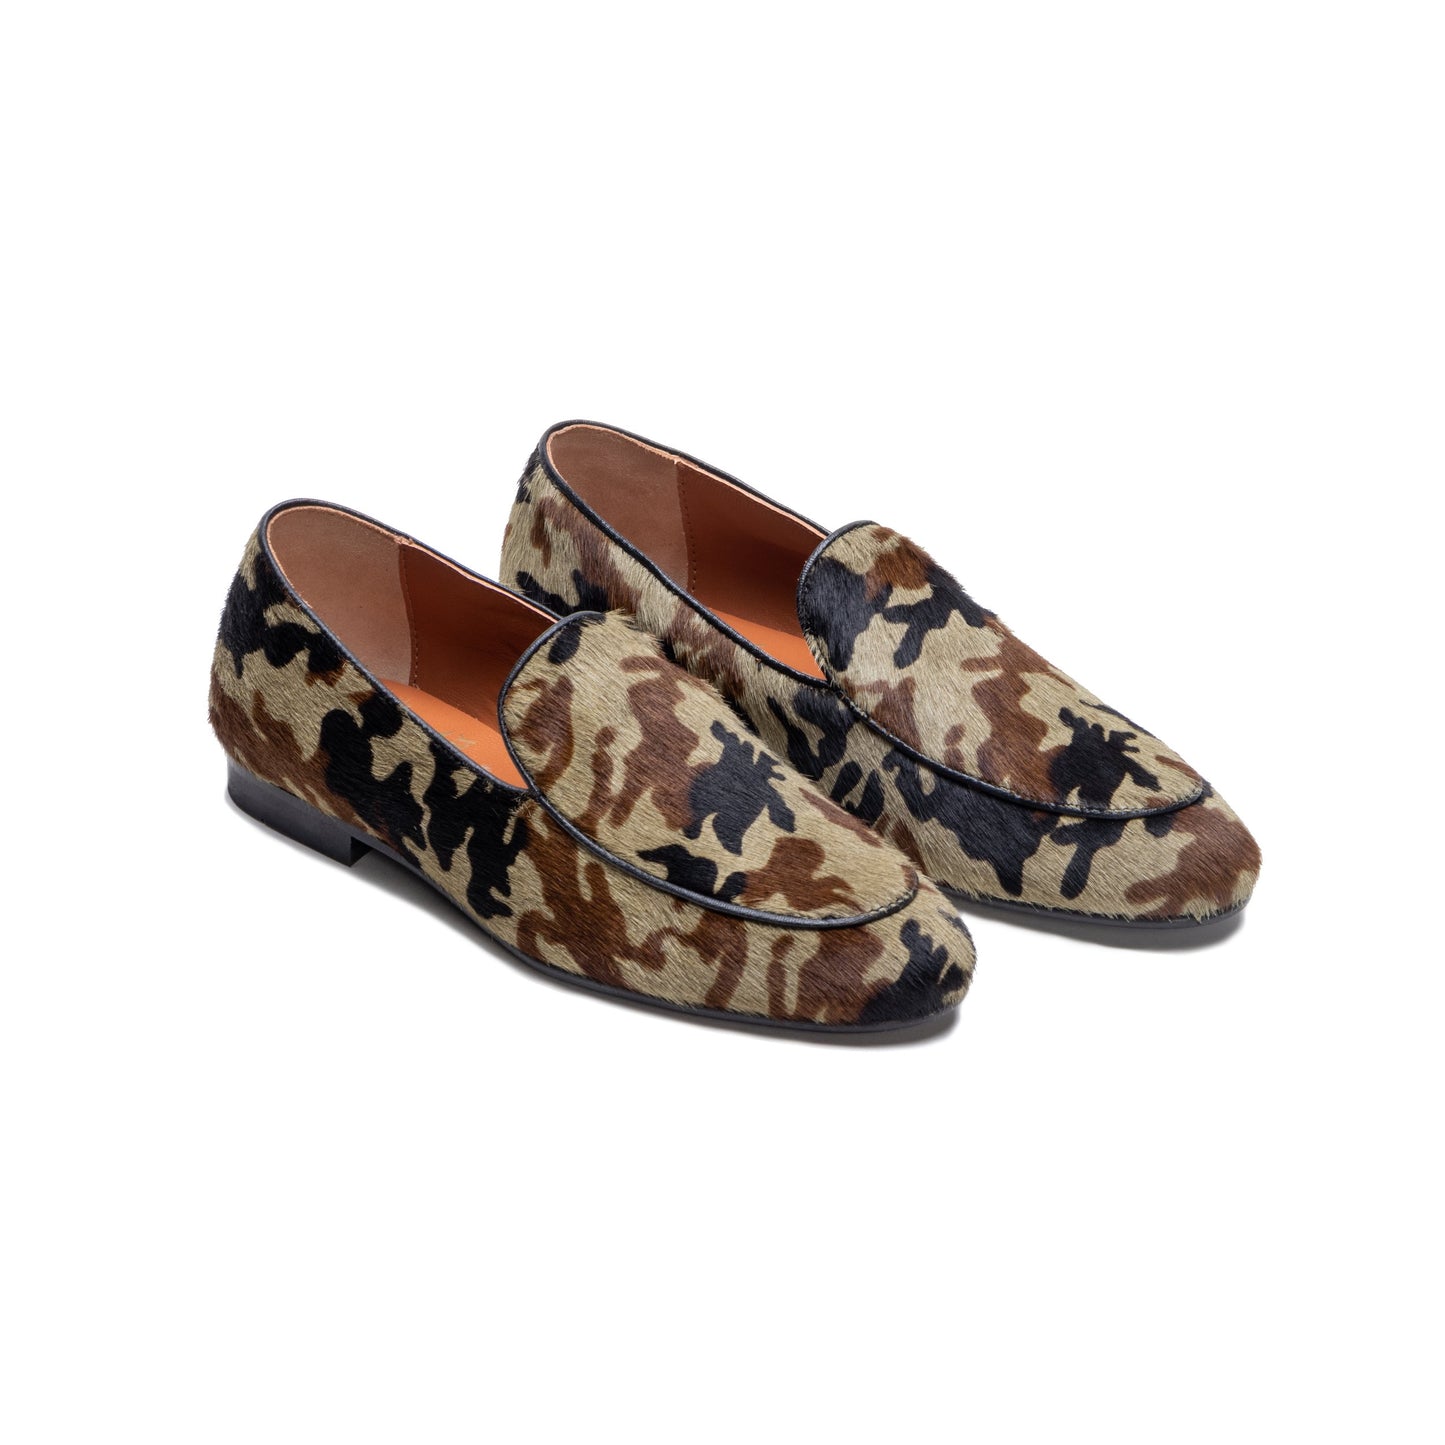 Camo Green Loafers